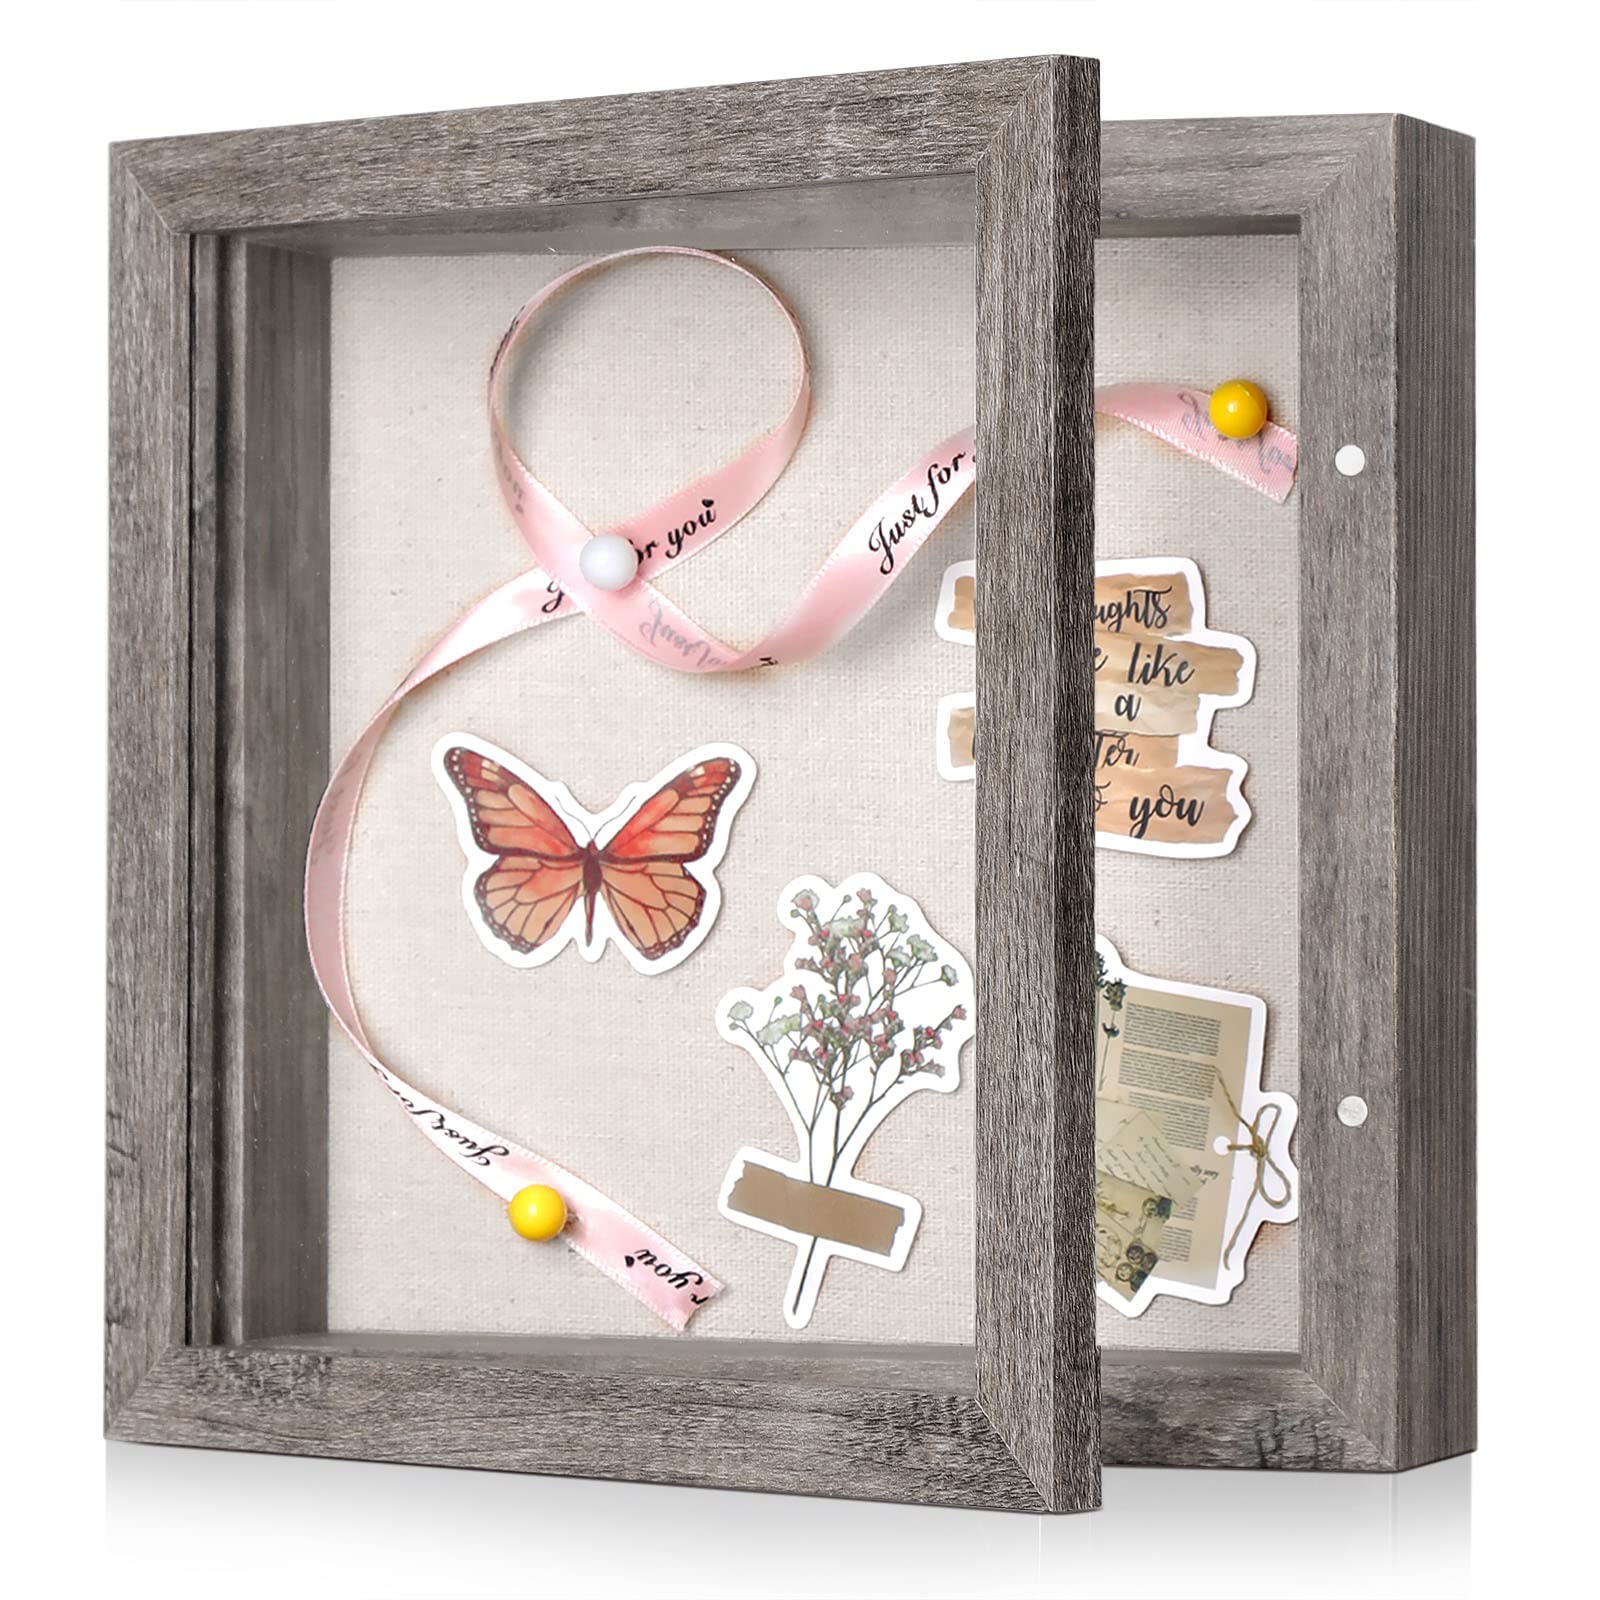 Califortree 8x8 Shadow Box Frame with Linen Back - Sturdy Rustic Memory  Display Case of Flower, Pictures, Medals and More, Rustic Gray